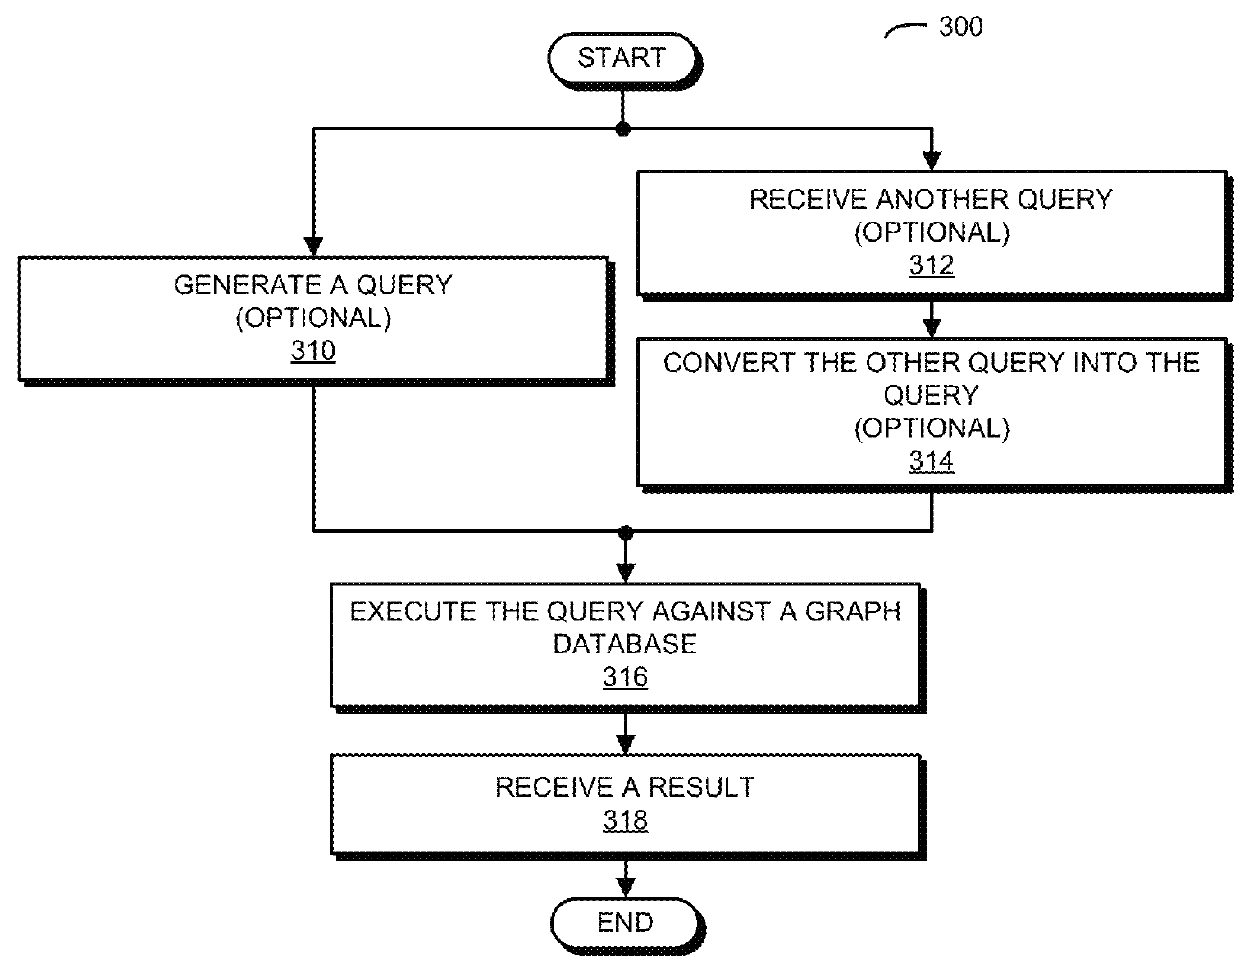 Concatenated queries based on graph-query results